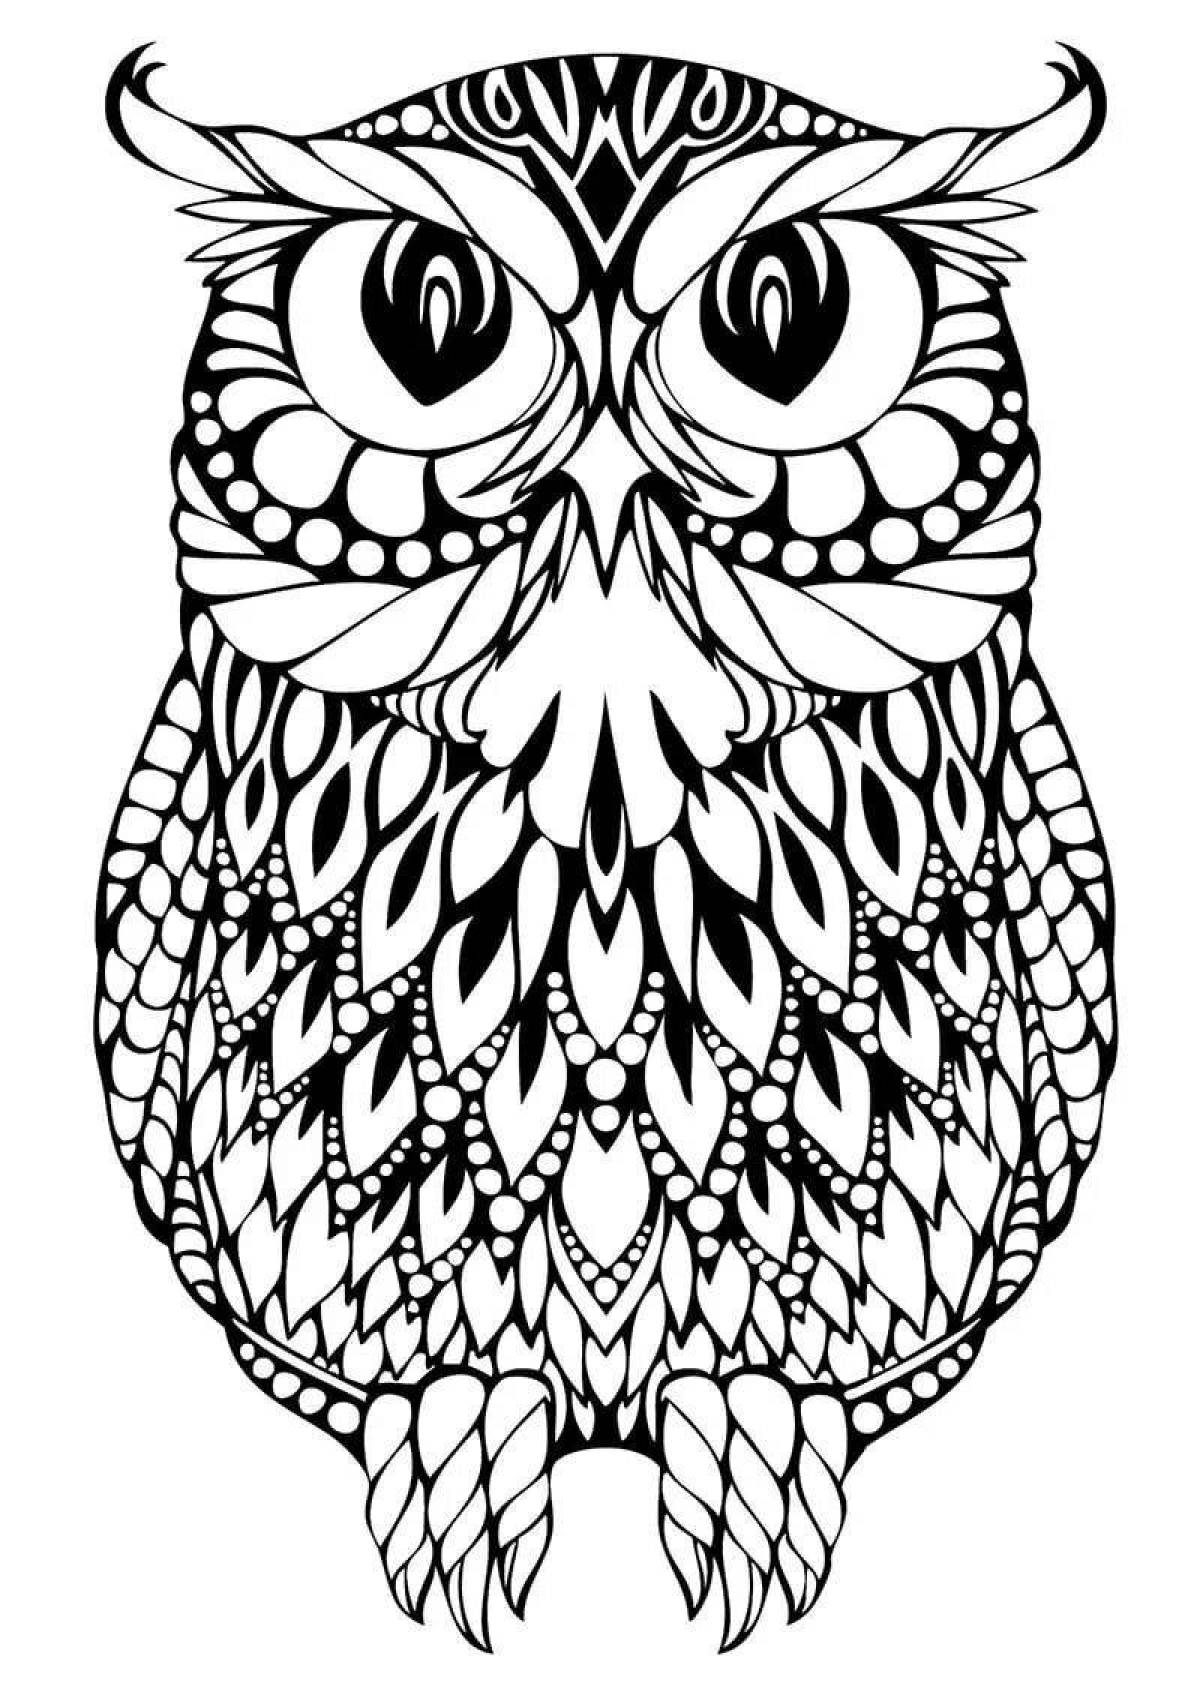 Joyful owl coloring pages